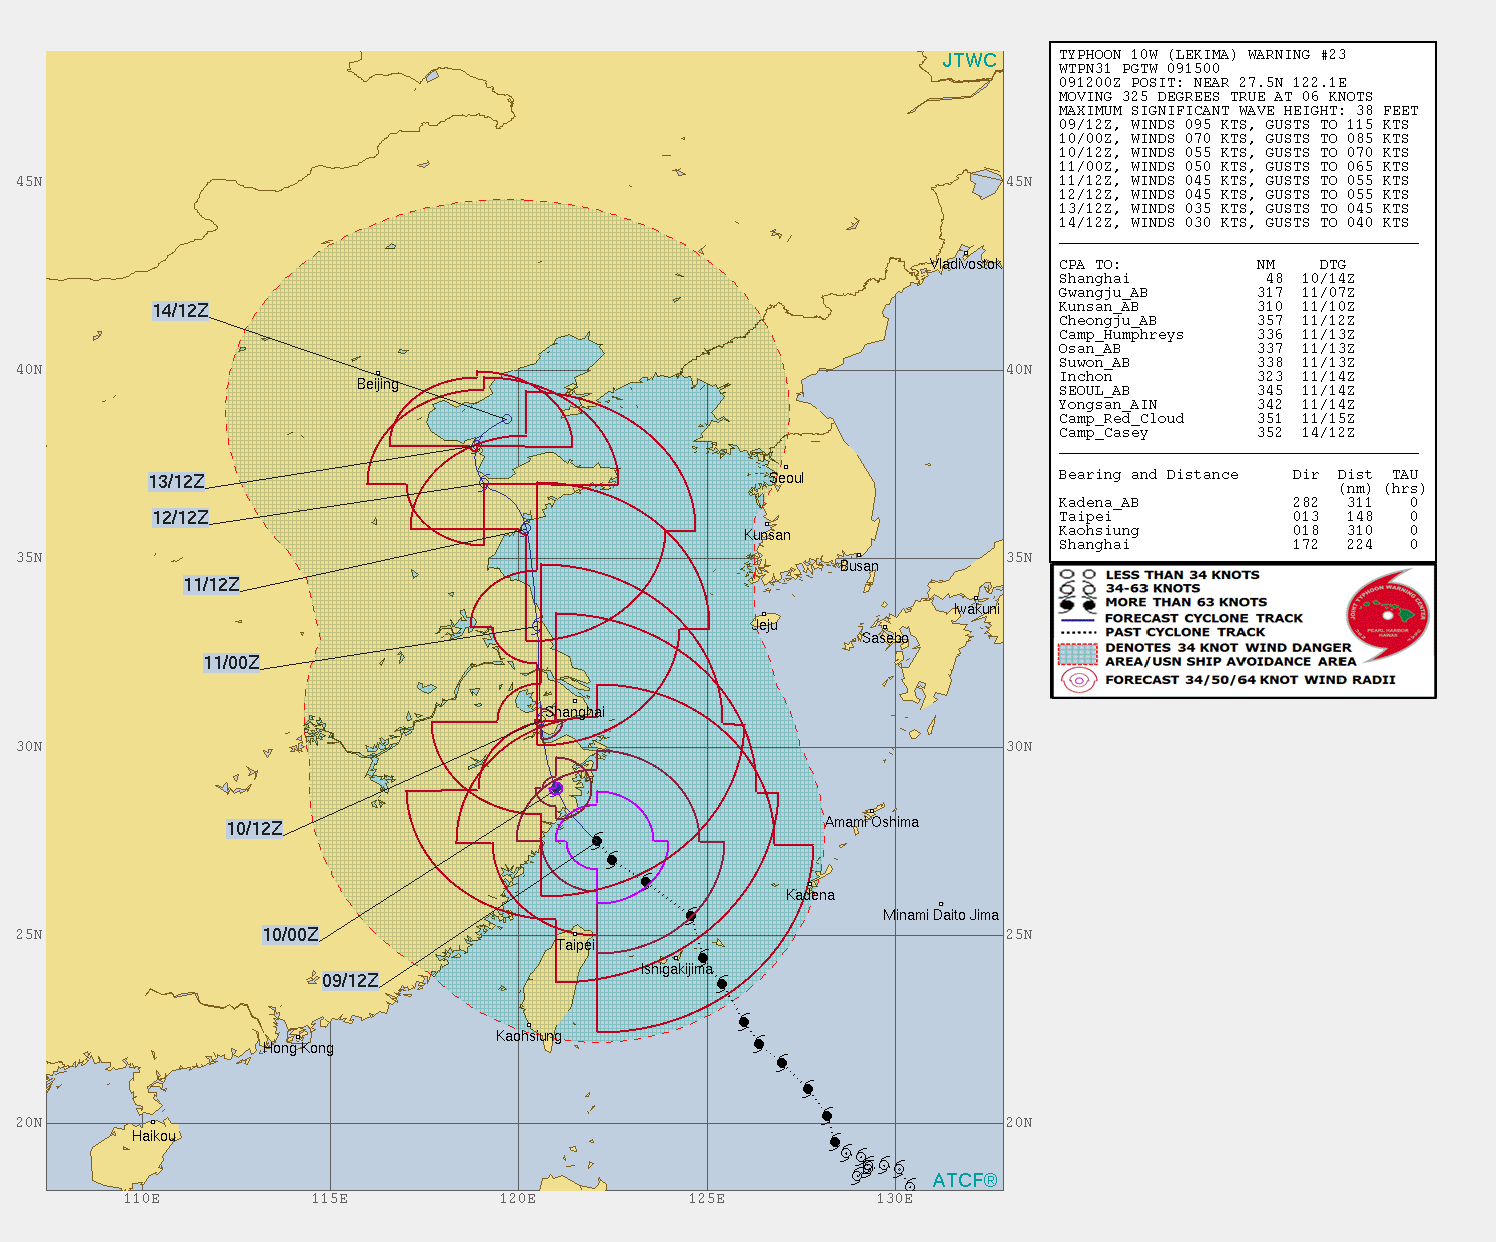 LEKIMA(10W) IS FORECAST TO TRACK WEST OF SHANGHAI IN 23H WITH NEAR 55KNOTS WINDS